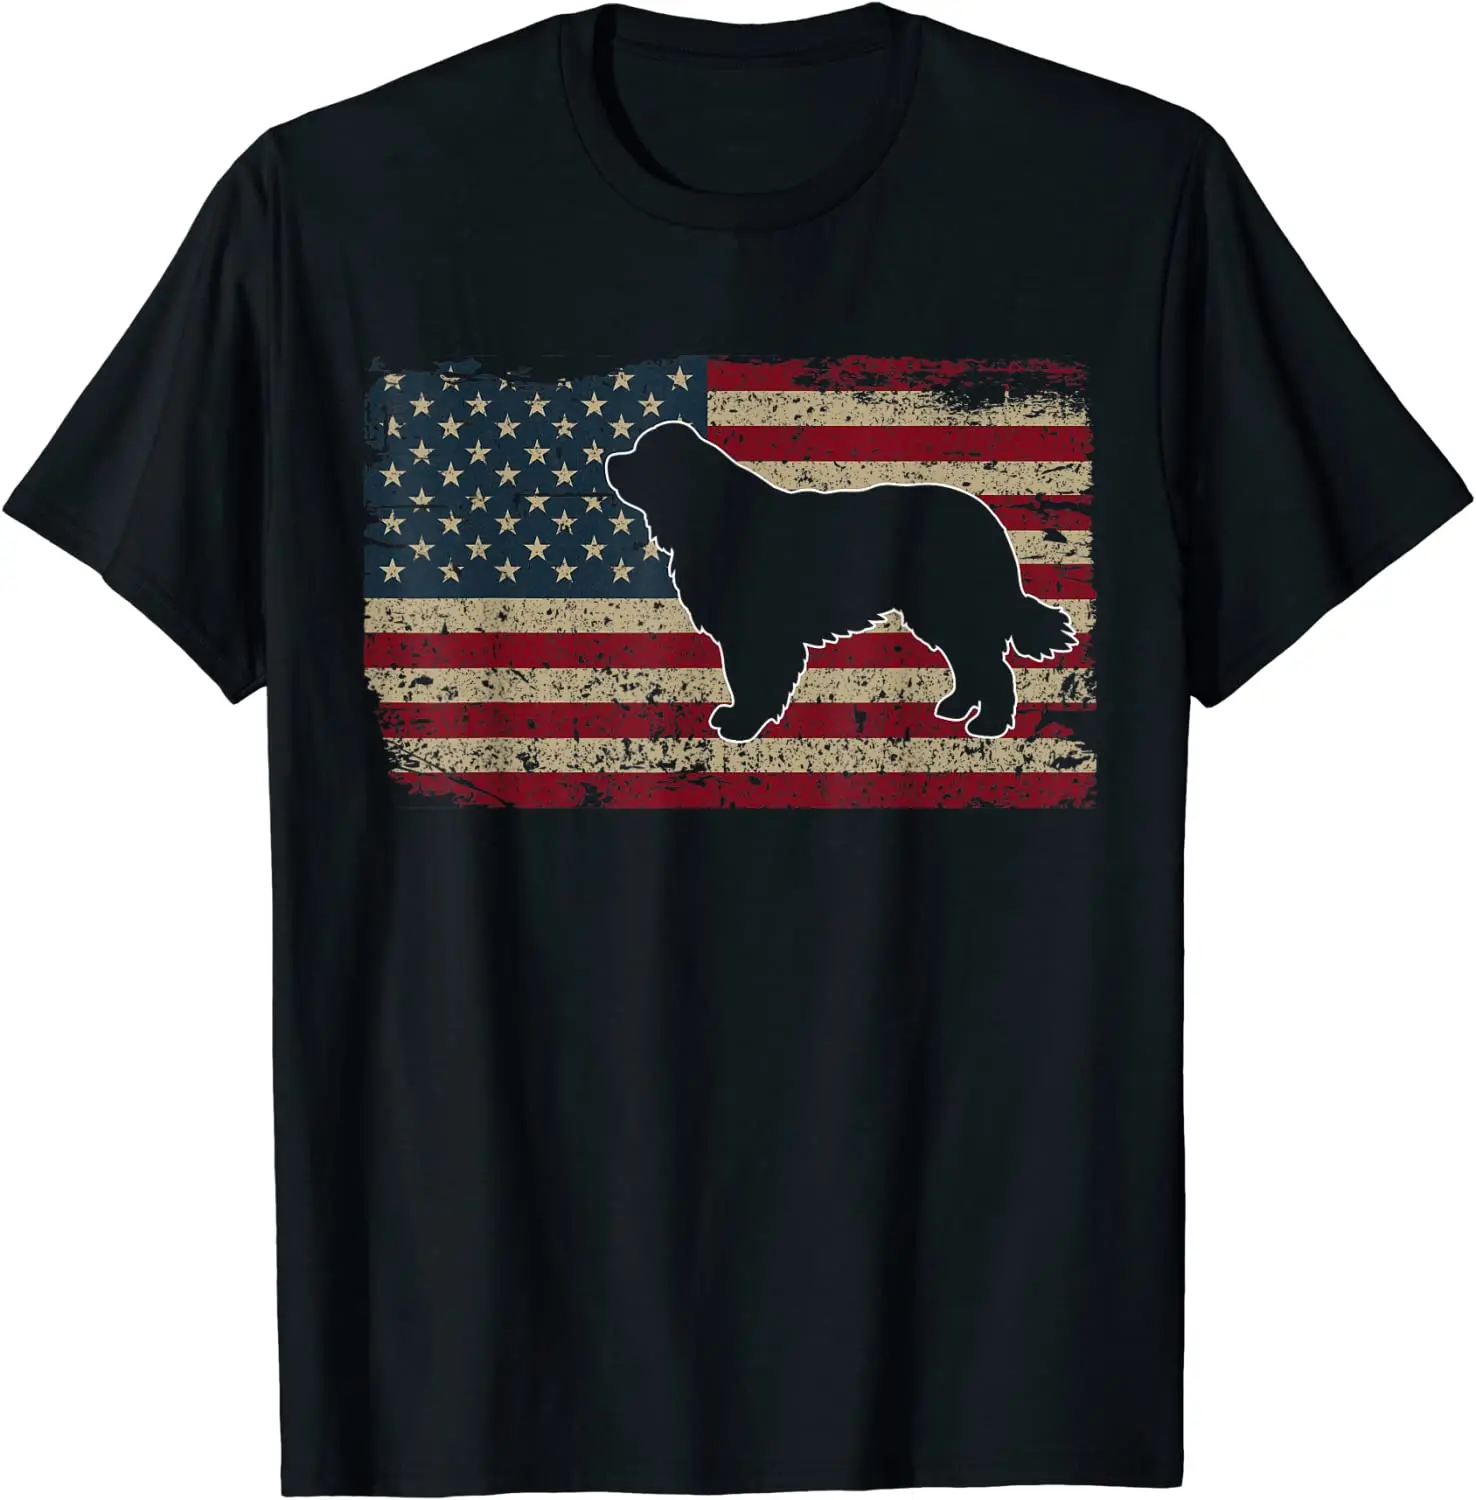 

Newfie Dog America Flag Patriotic Dog Lover Gift T-Shirt 4th of July Independence Day Shirts Cotton Daily Four Seasons Tshirt